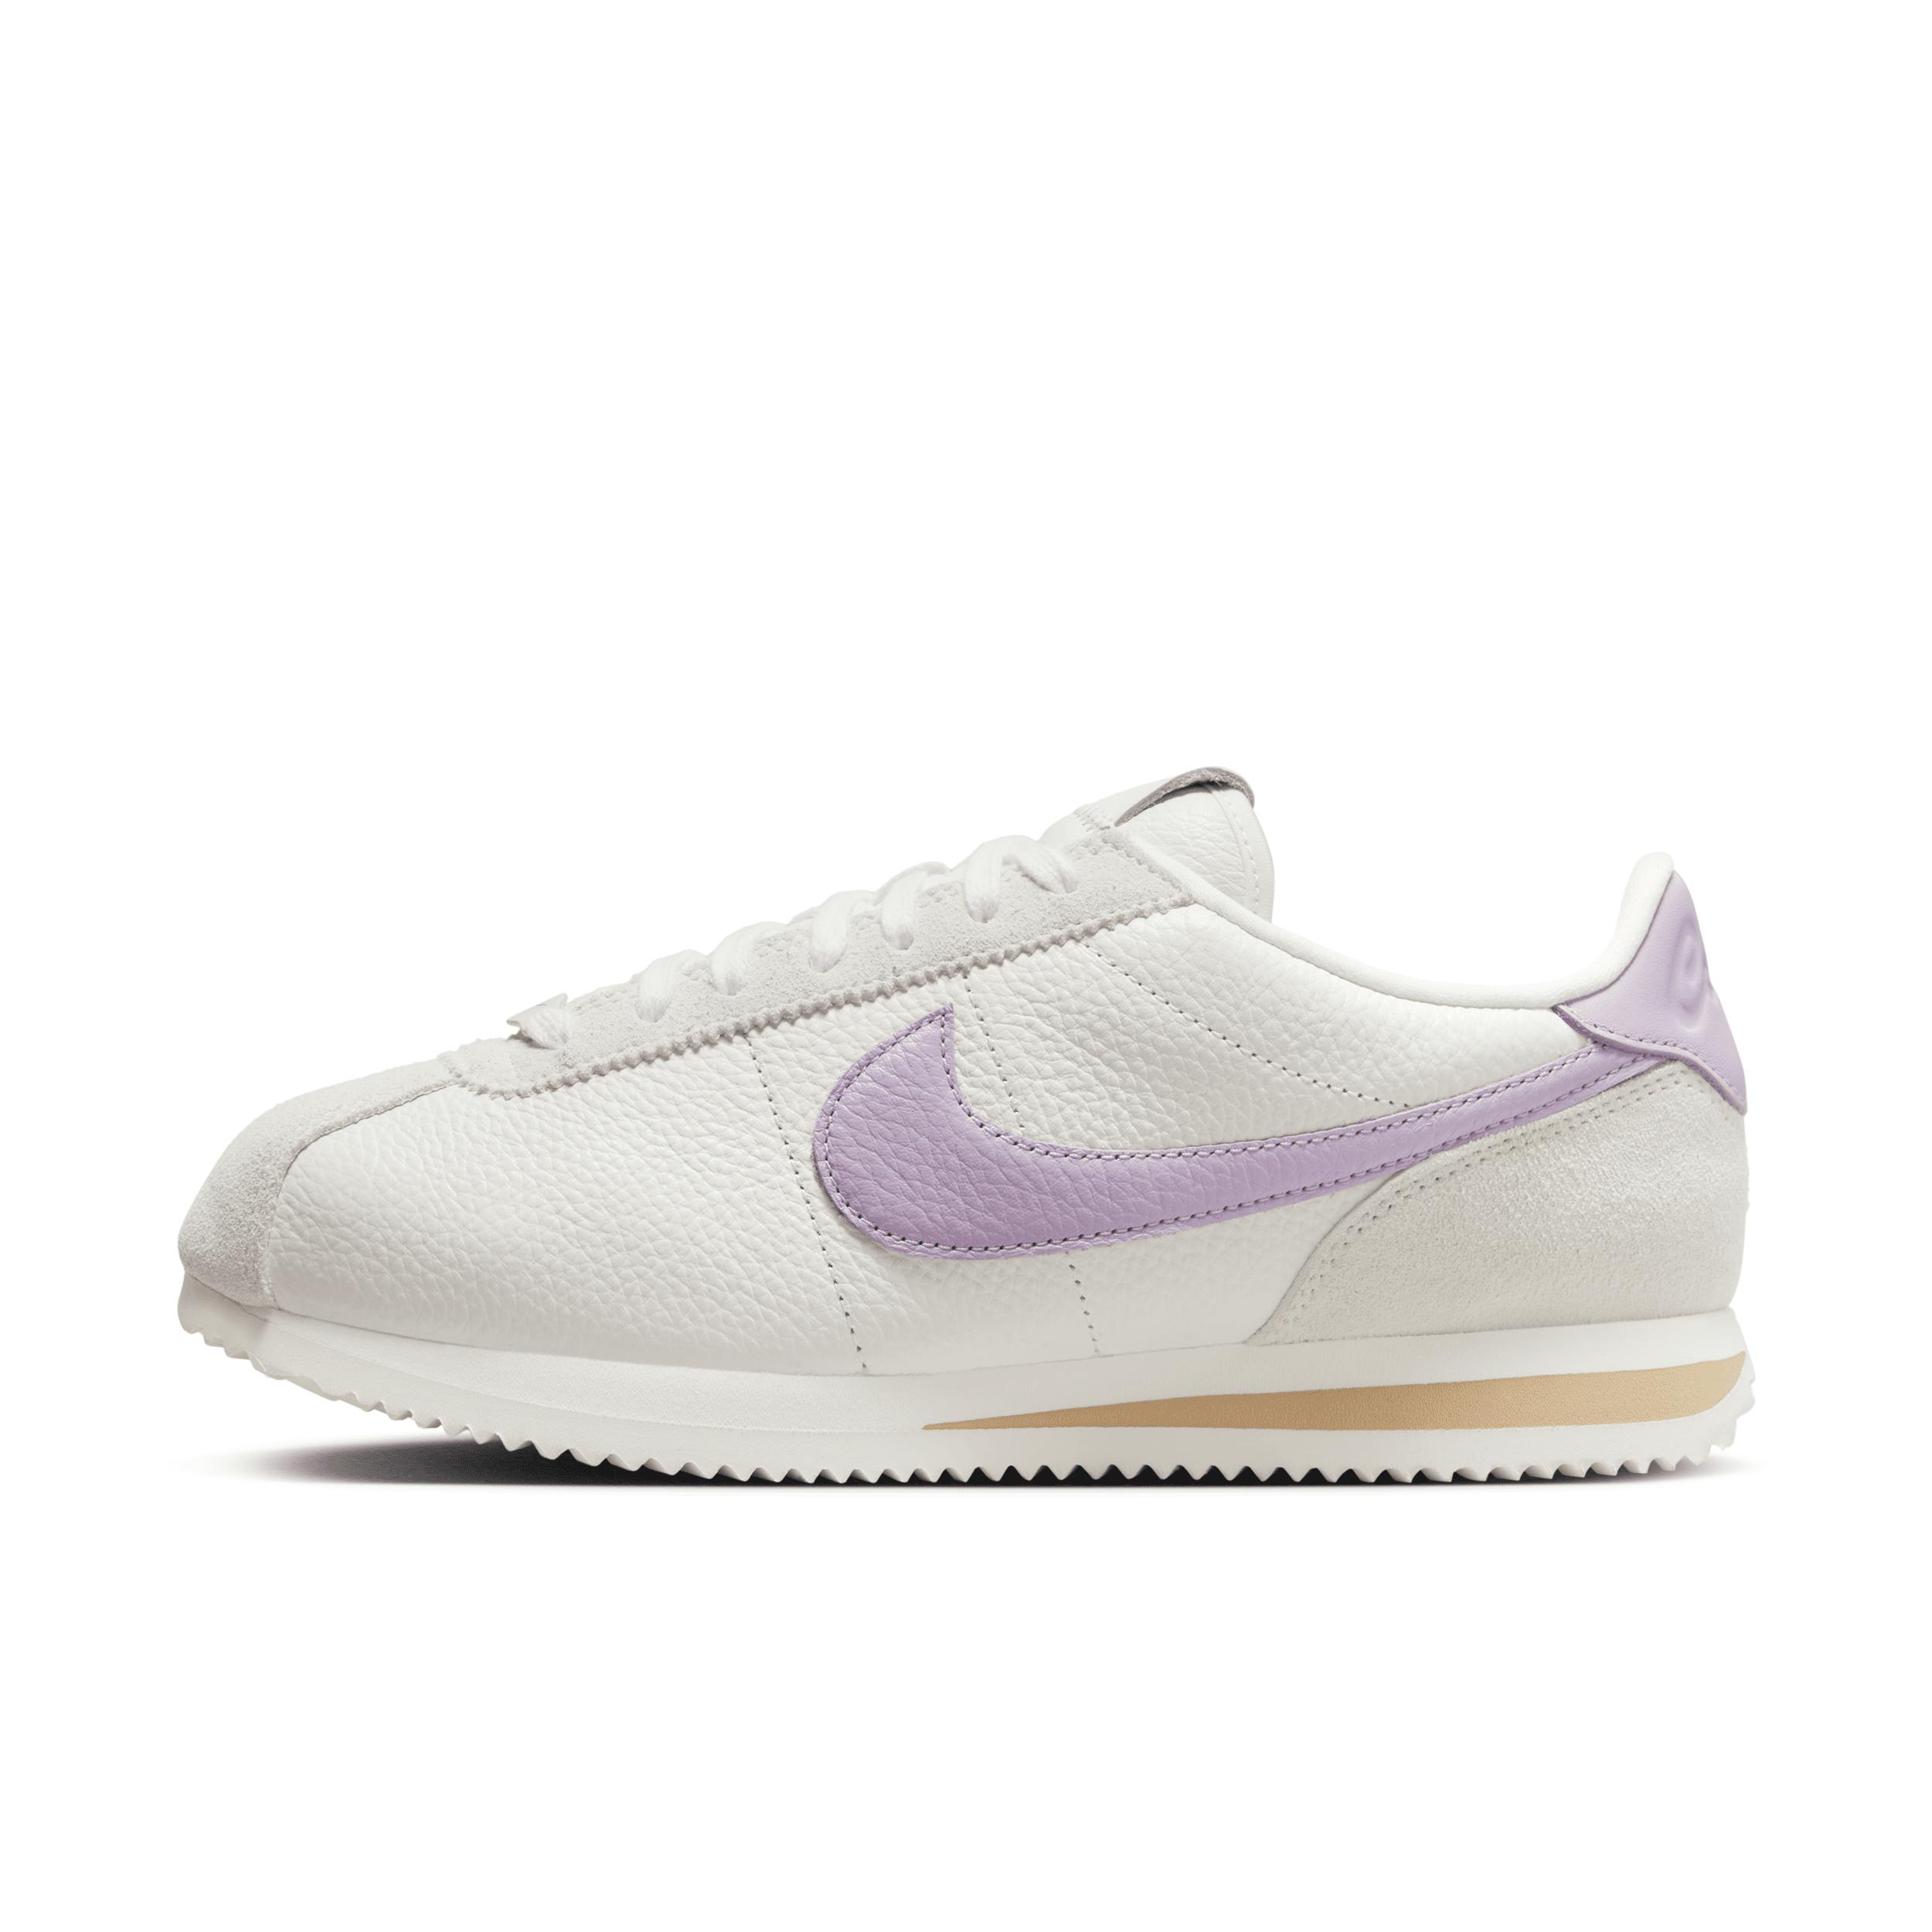 Nike Cortez Se Shoes in White | Lyst